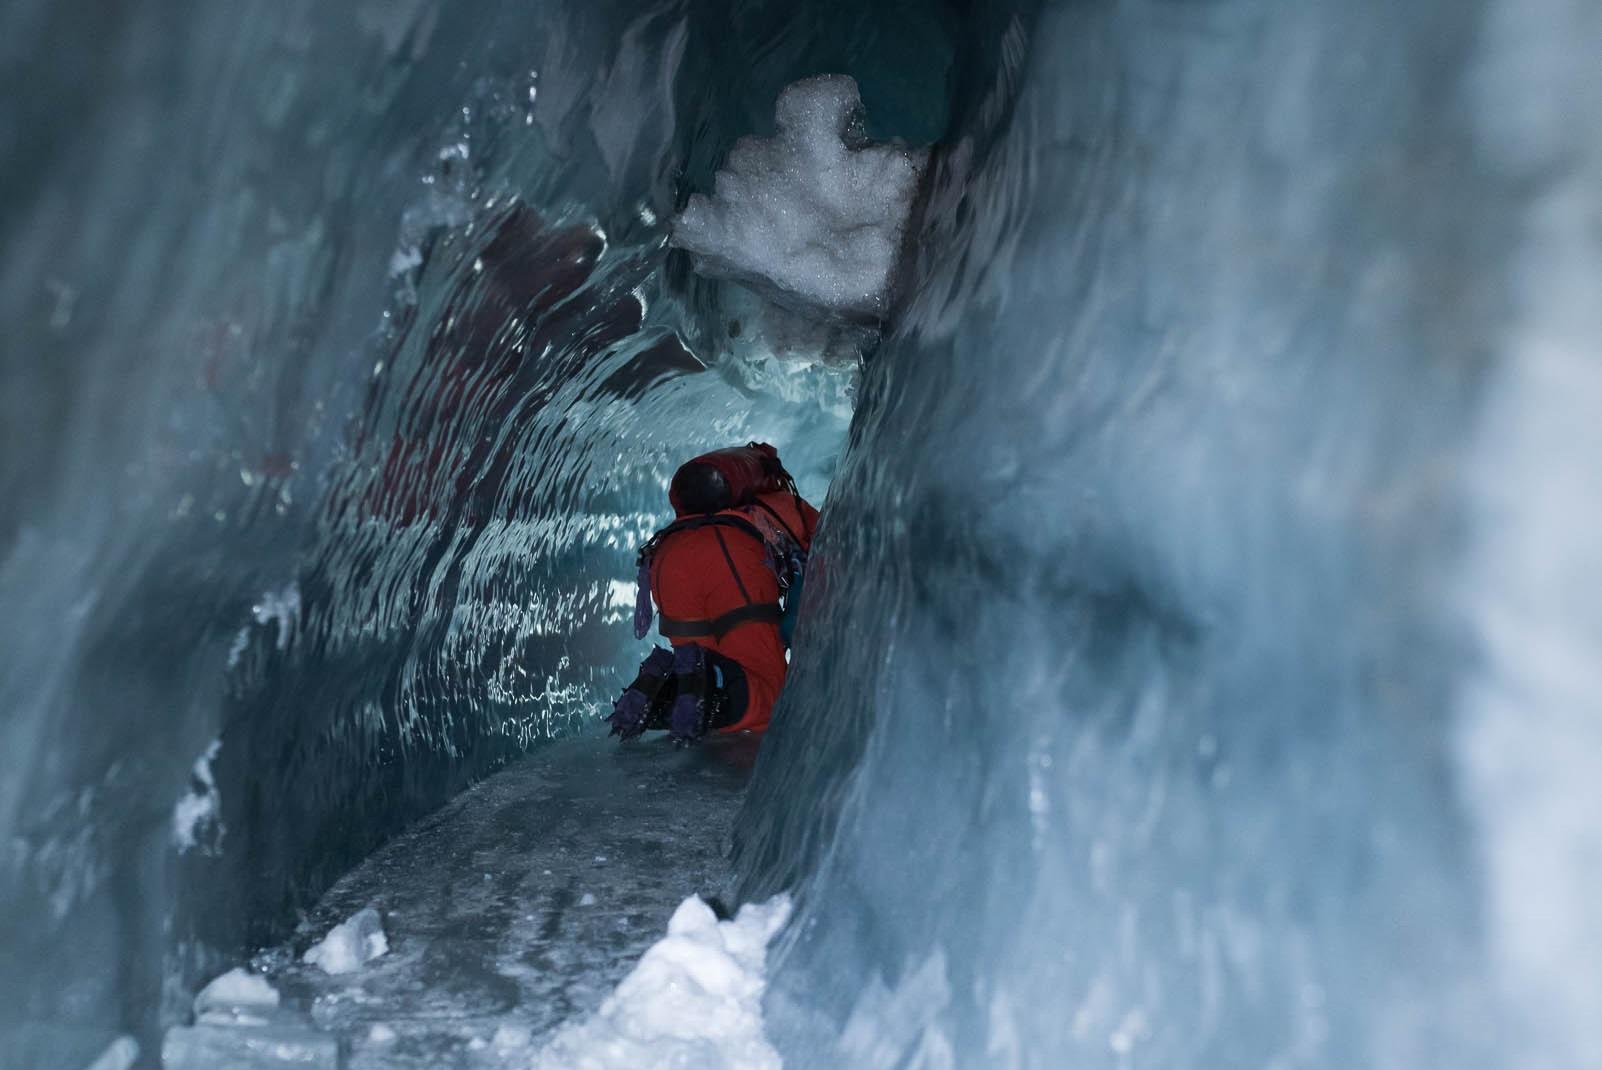 Man crawls through narrow icy tunnel on all fours